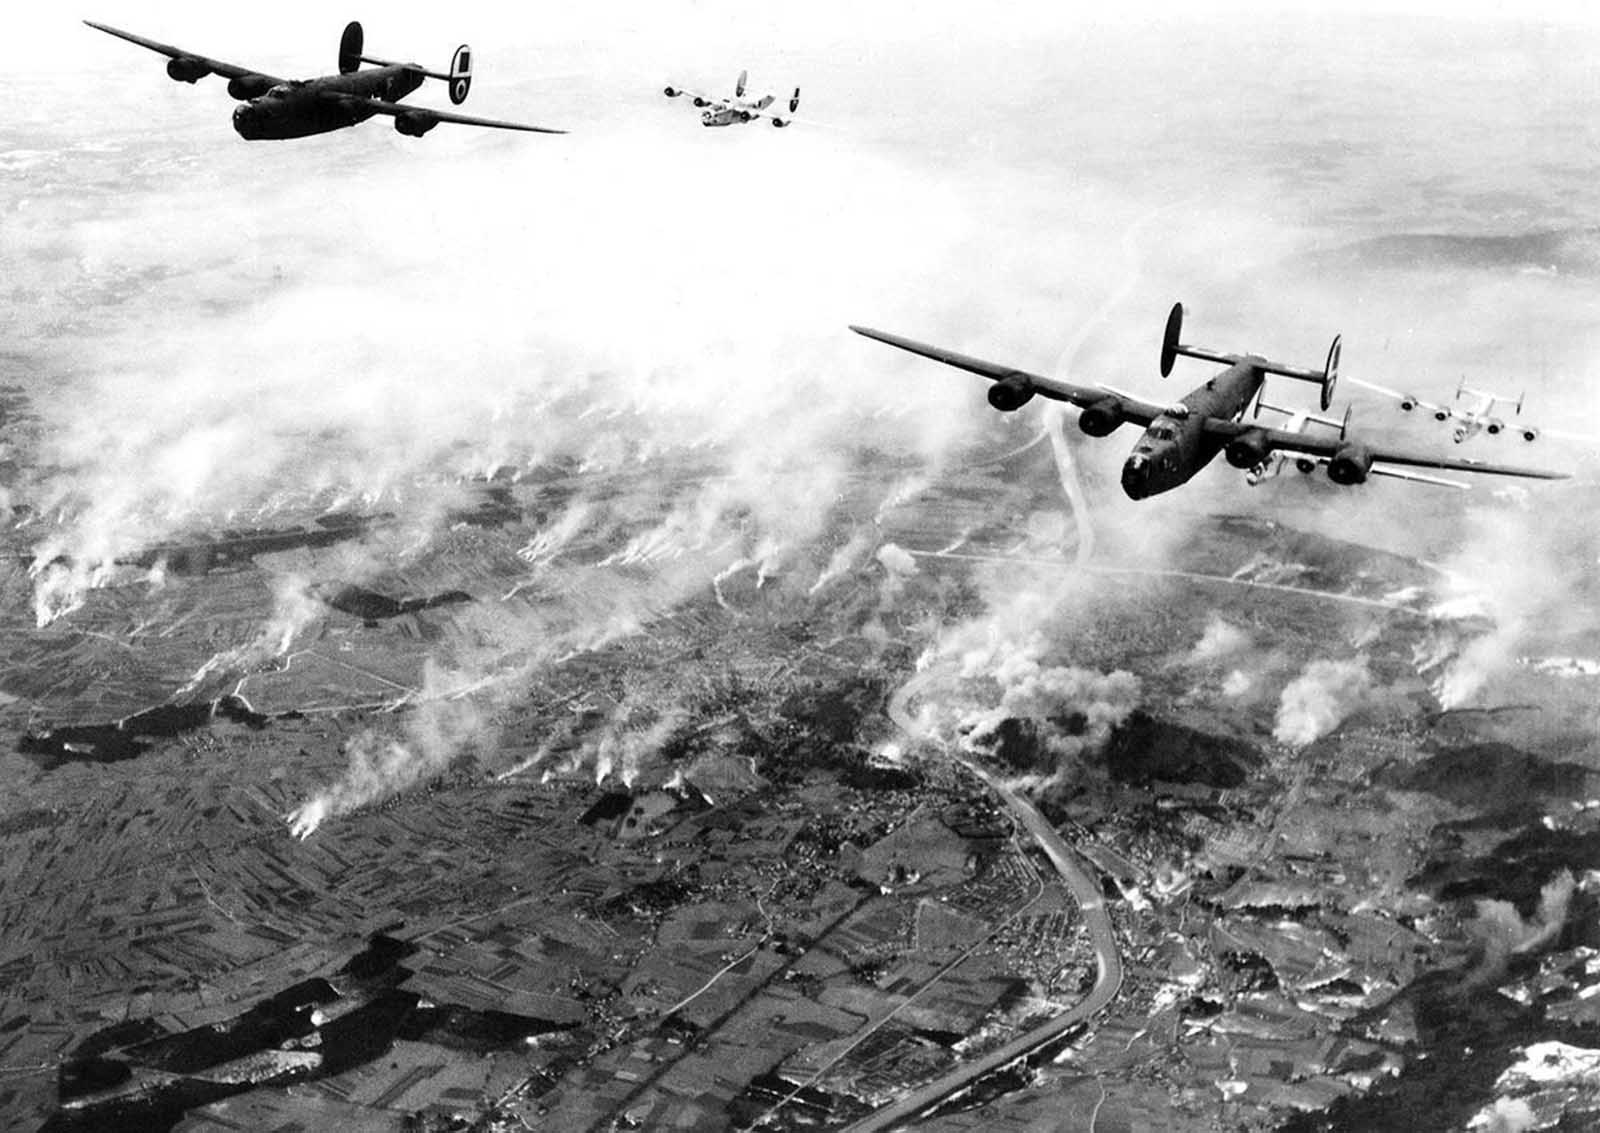 A formation of B-24s of Maj. General Nathan F. Twining's U.S. Army 15th Air Force thunders over the railway yards of Salzburg, Austria, on December 27, 1944. The smoke created by their bombs mingles with that from the enemy's many smudge pots.